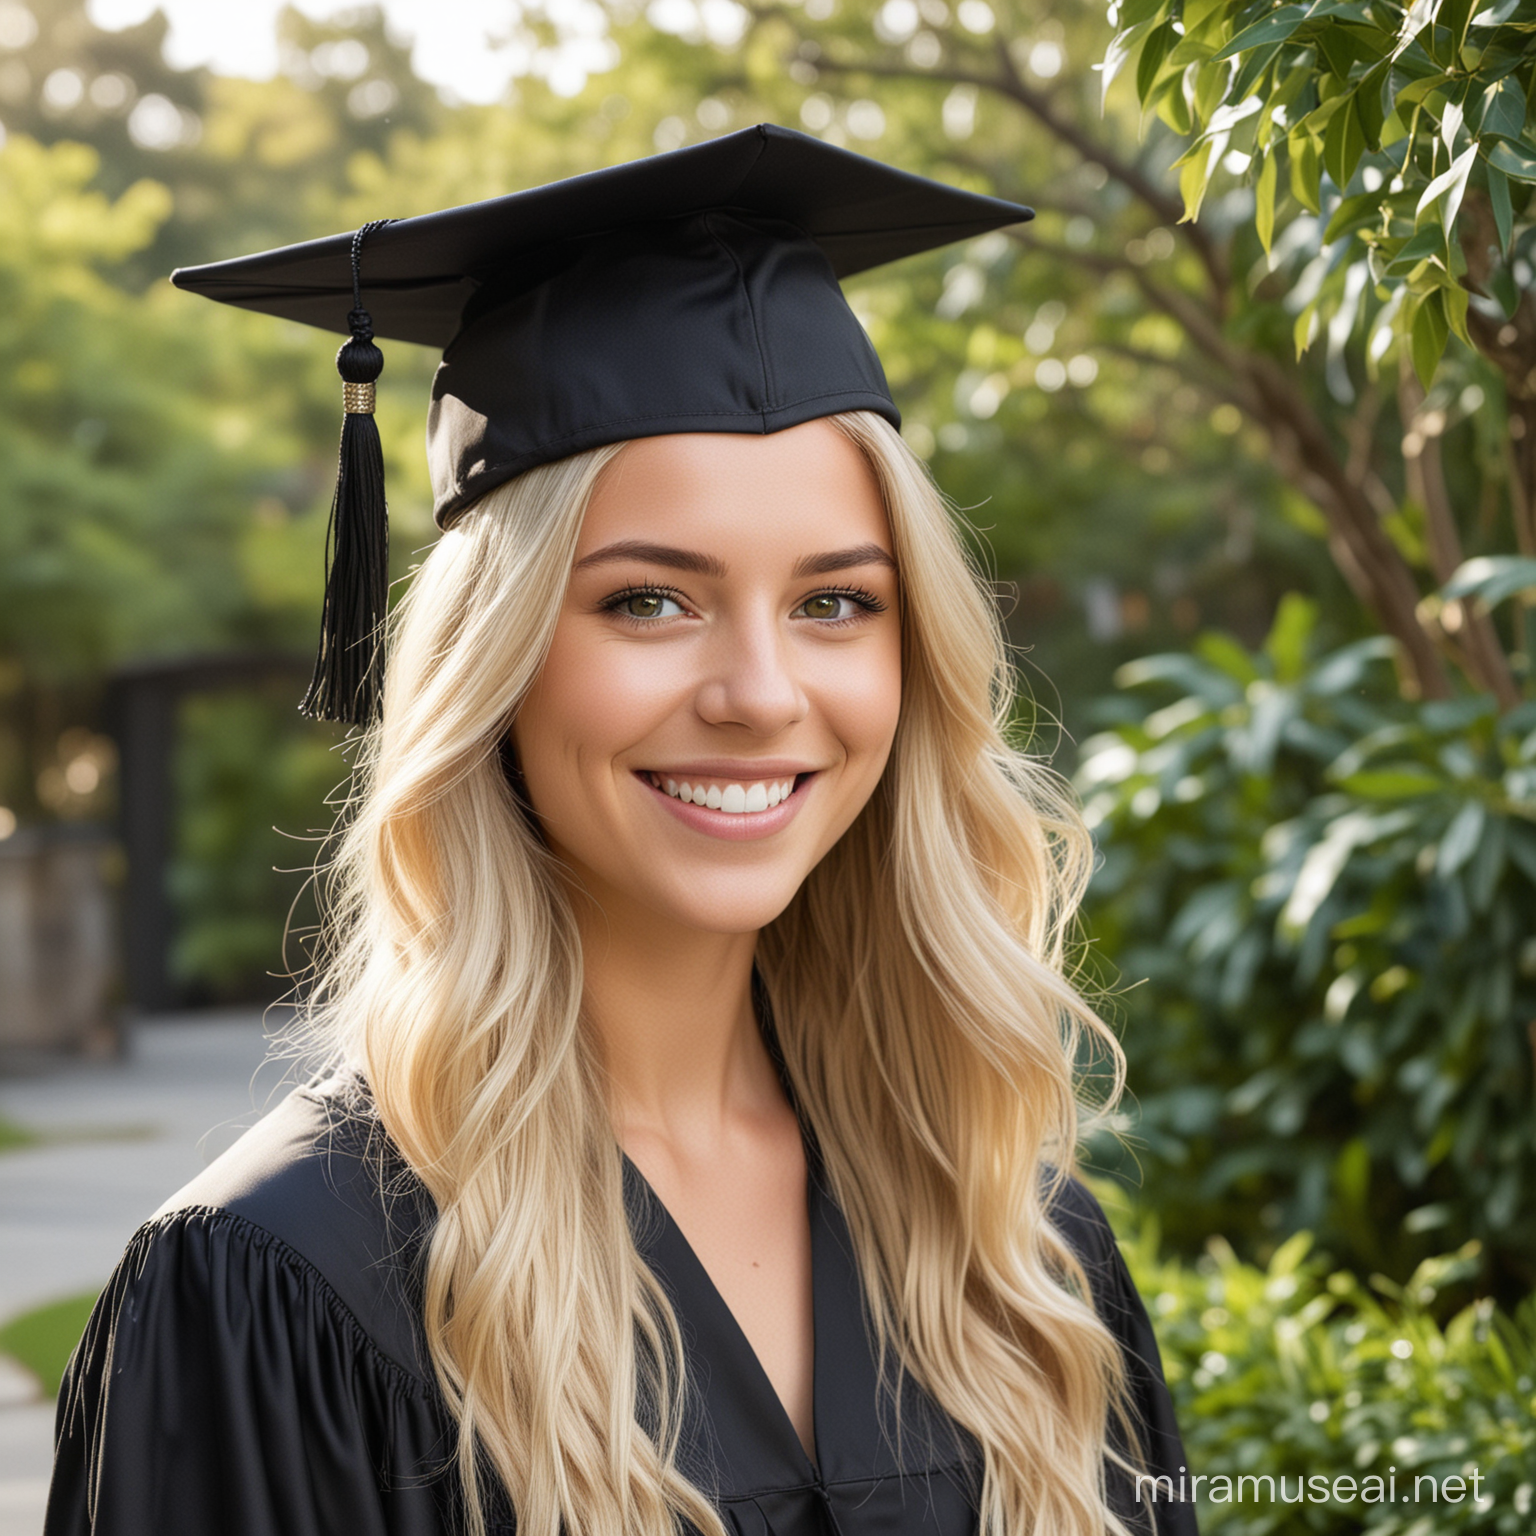 Create an image of a young woman with light blonde hair that falls in loose waves, wearing a black graduation cap and gown. The cap is adorned with a long, silver tassel. She has a radiant smile, bright eyes, and an air of celebration about her. The background is softly blurred with hints of greenery, suggesting an outdoor setting. Her appearance reflects the happiness and satisfaction of achieving an academic milestone.